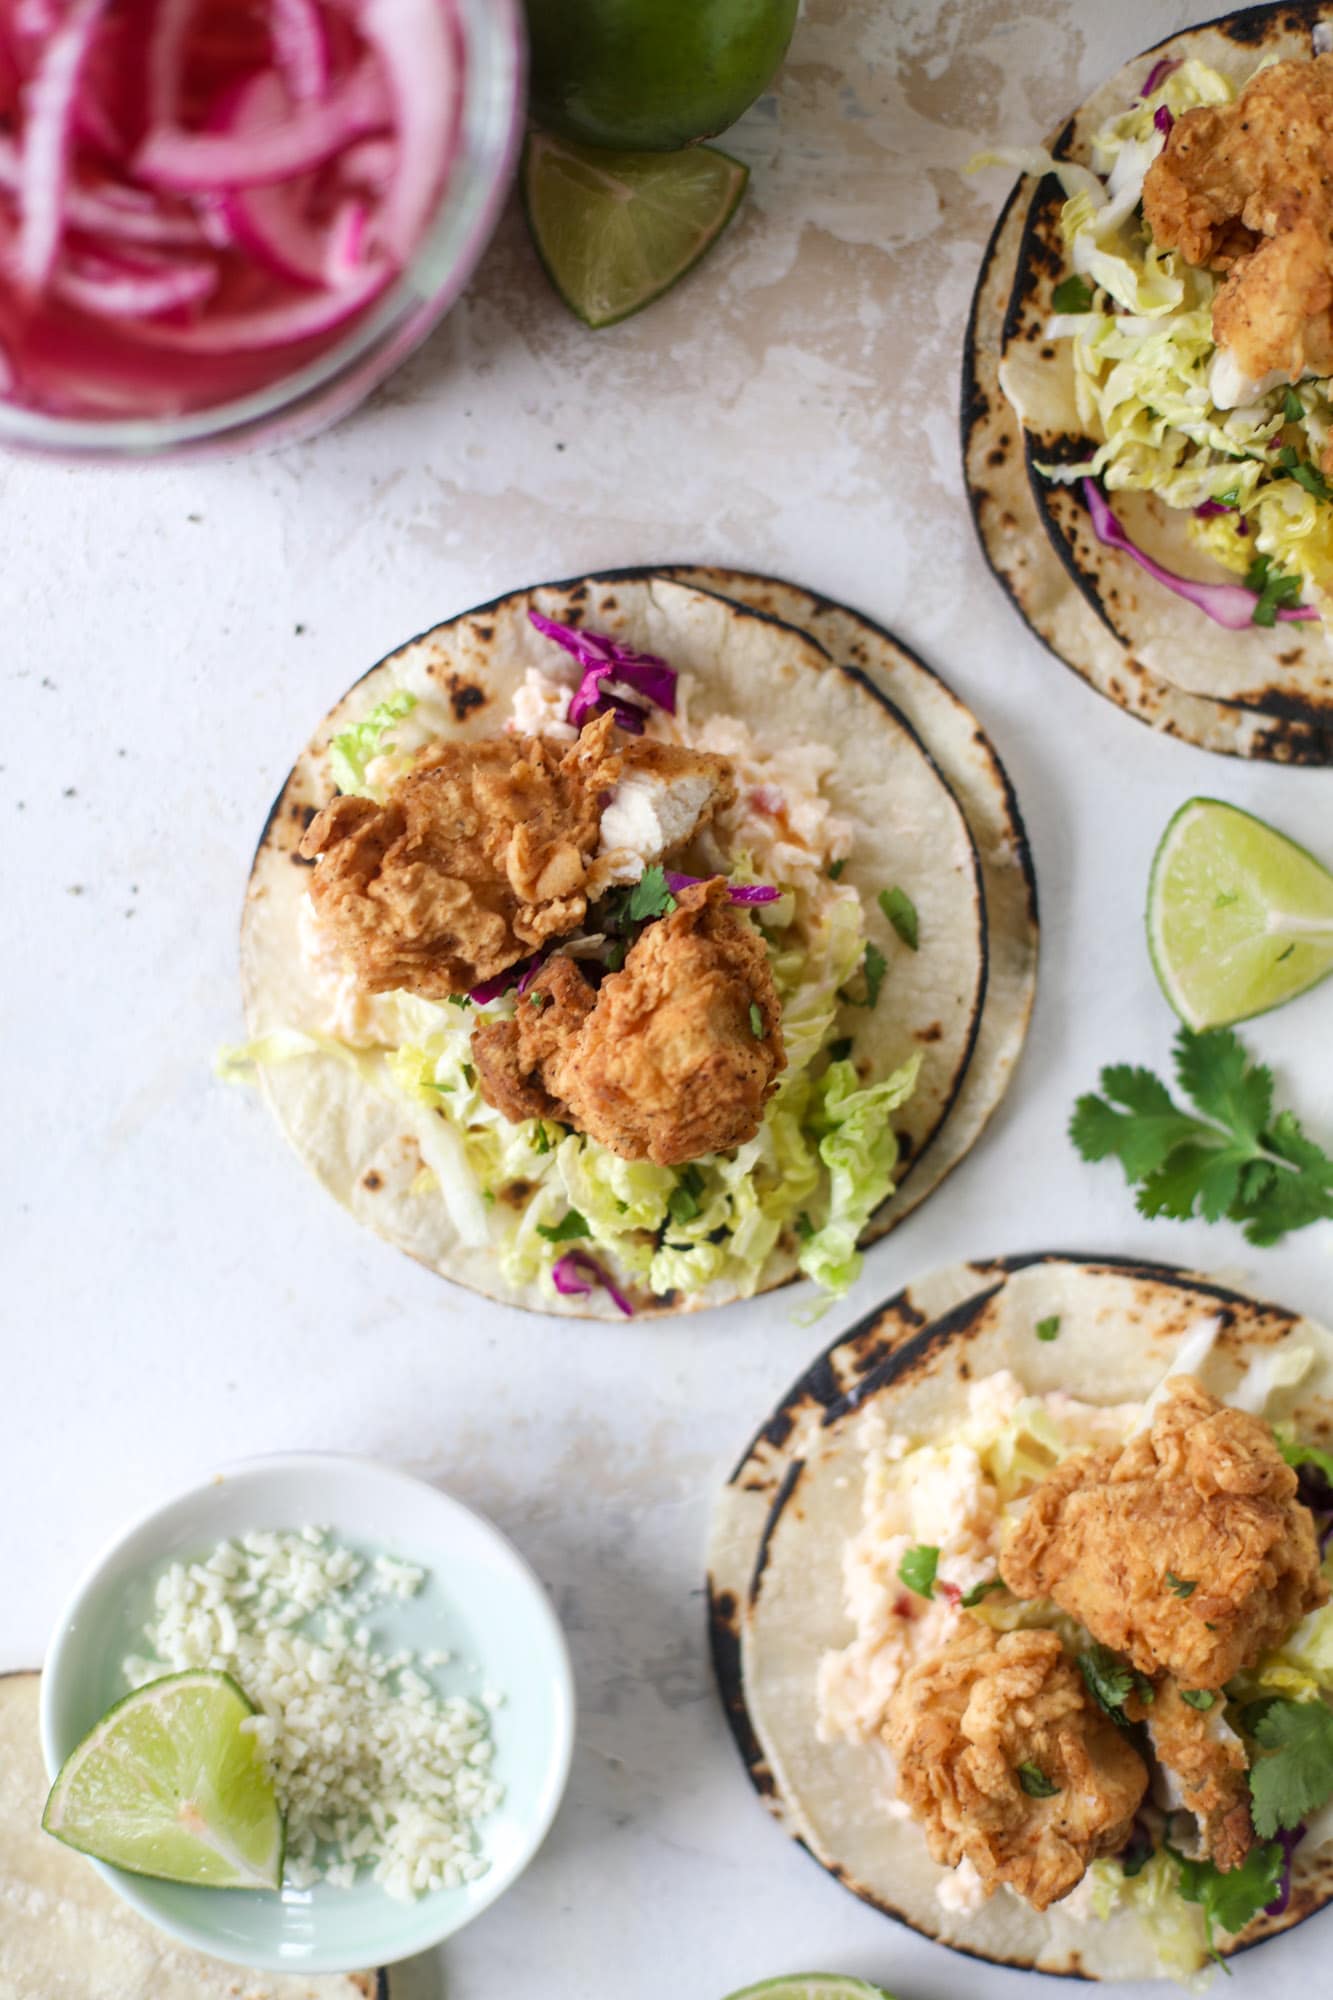 Taking crispy chicken tacos to the next level by wrapping them in a warm tortilla with gouda pimento cheese, lime cabbage and pickled onions!